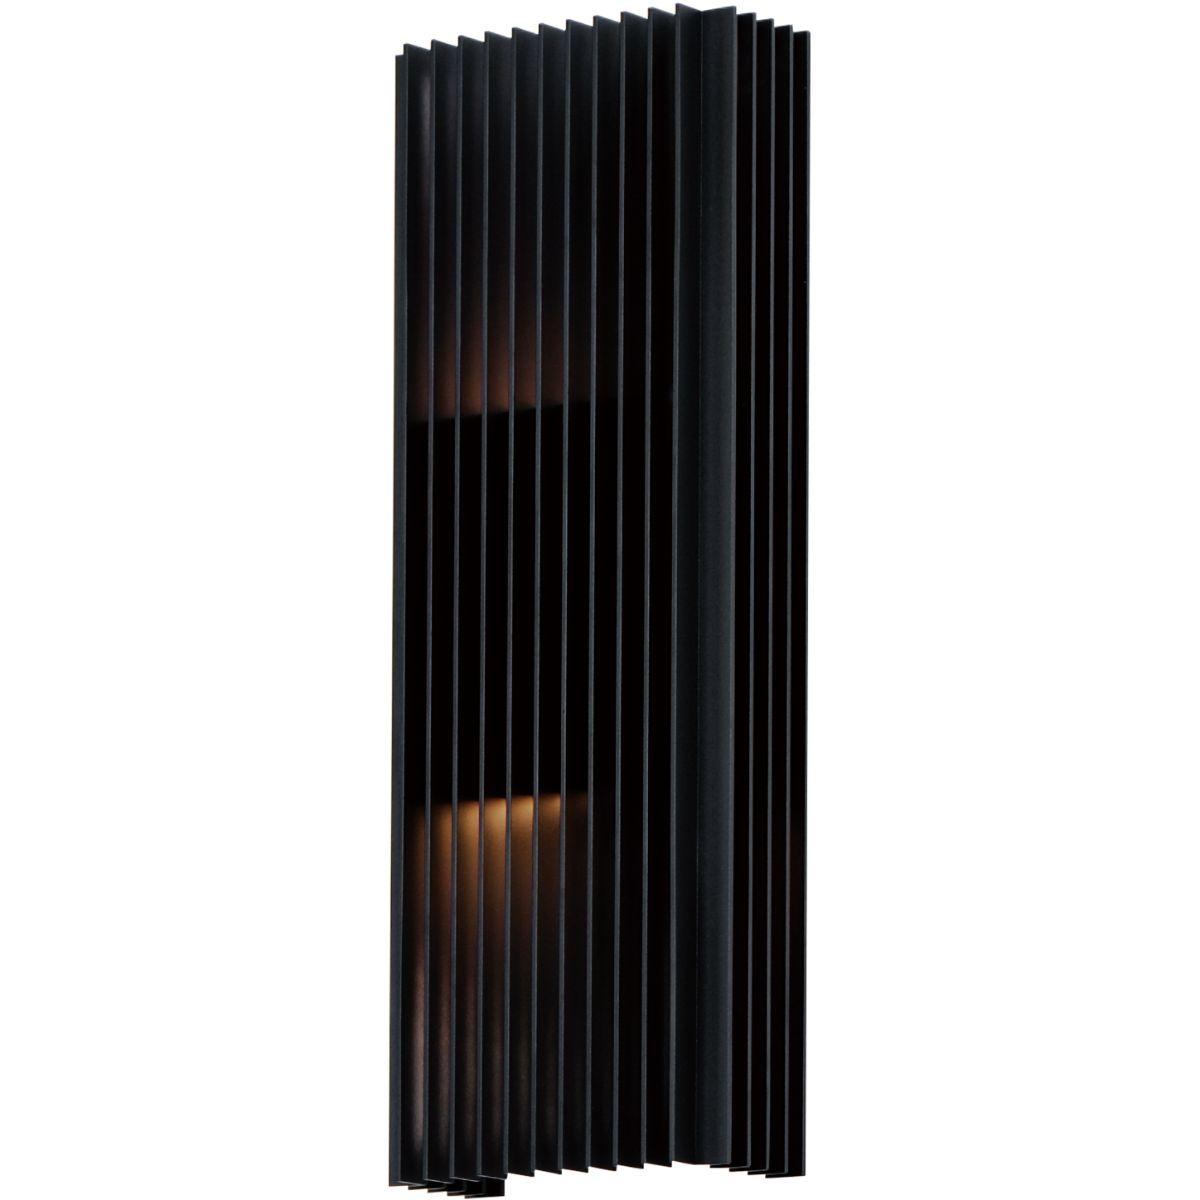 Rampart 22 in. LED Outdoor Wall Sconce 3000K Black Finish